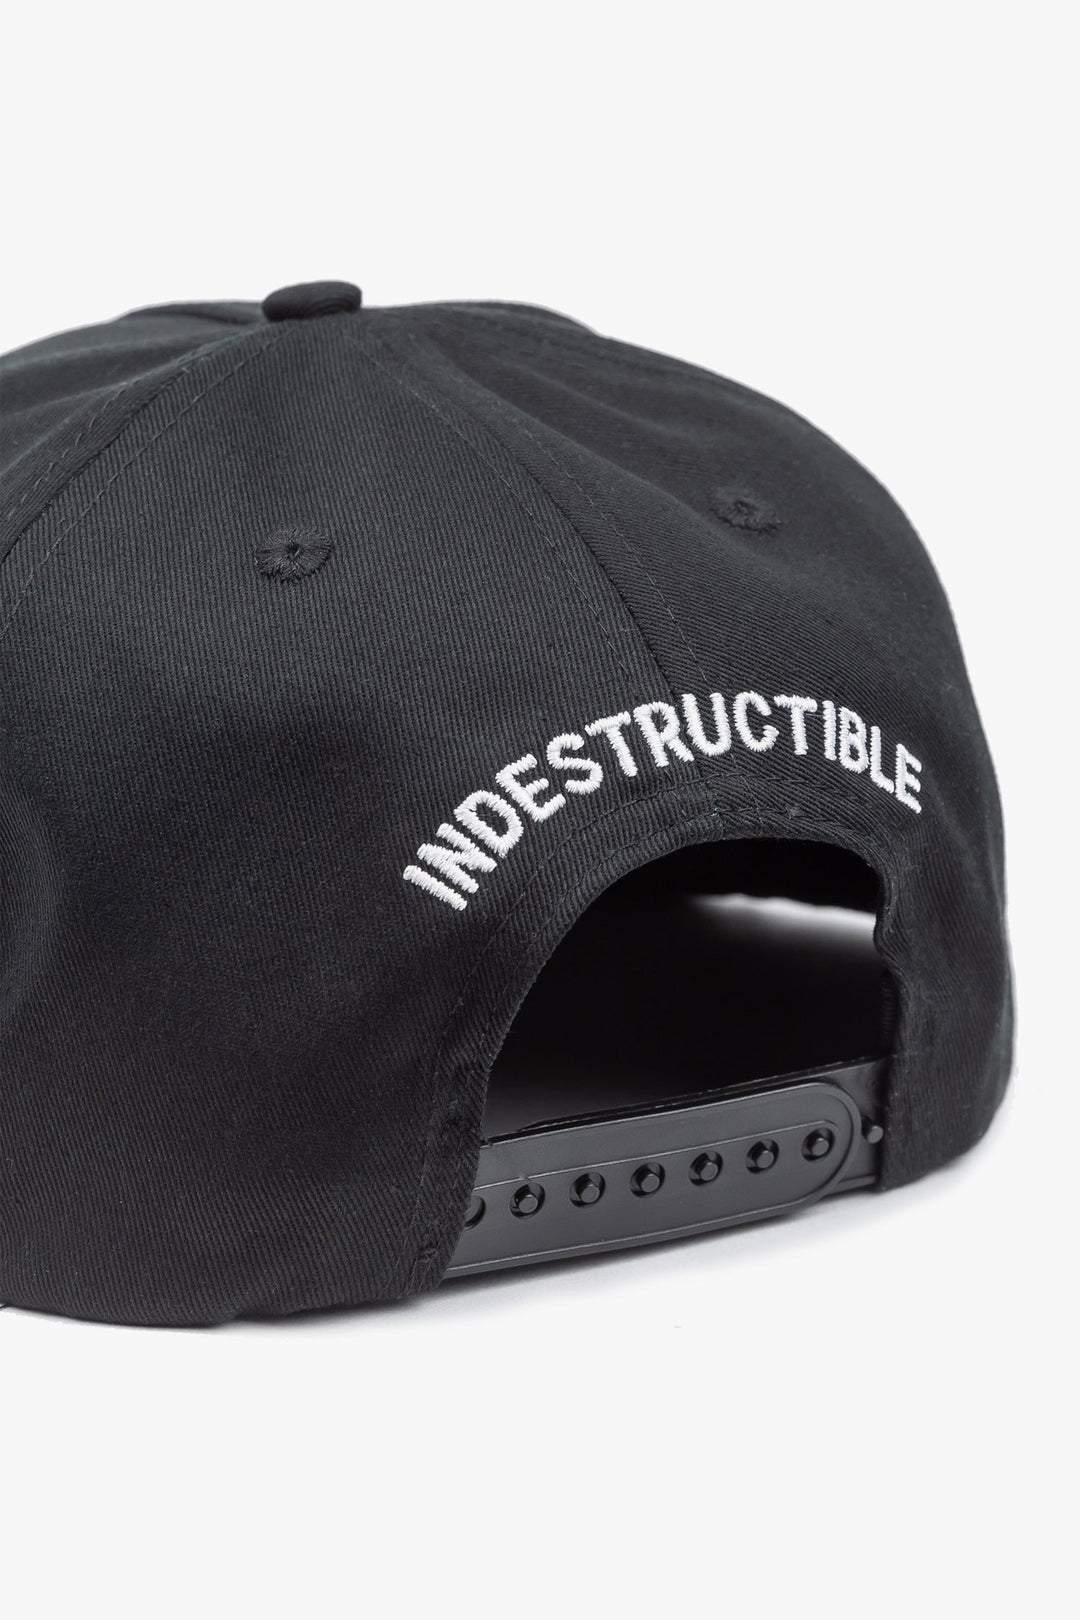 Grizzly Snapback - Indestructible MFG